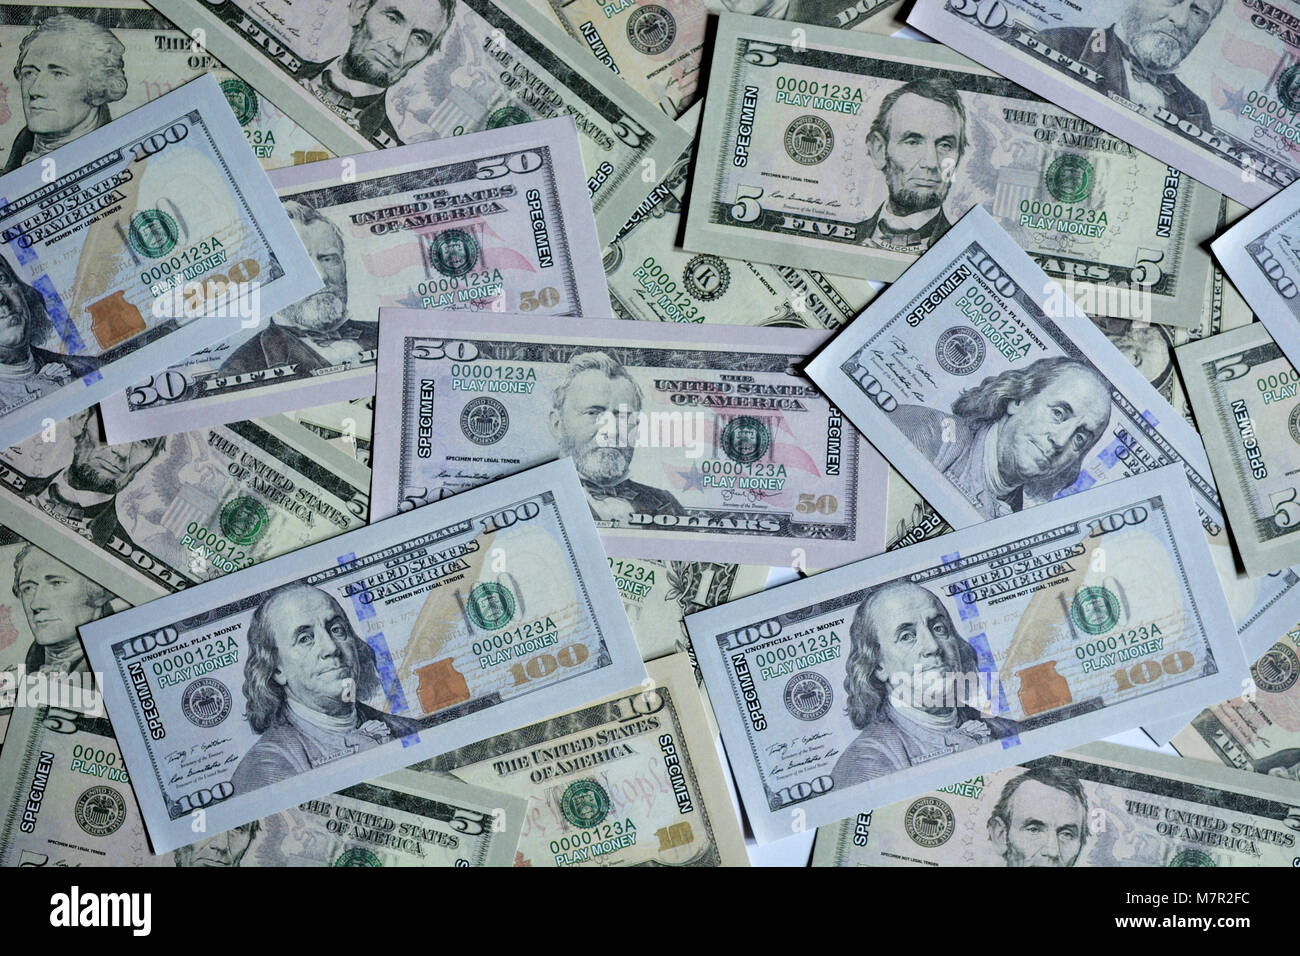 US paper currency hundred bill as a background Stock Photo